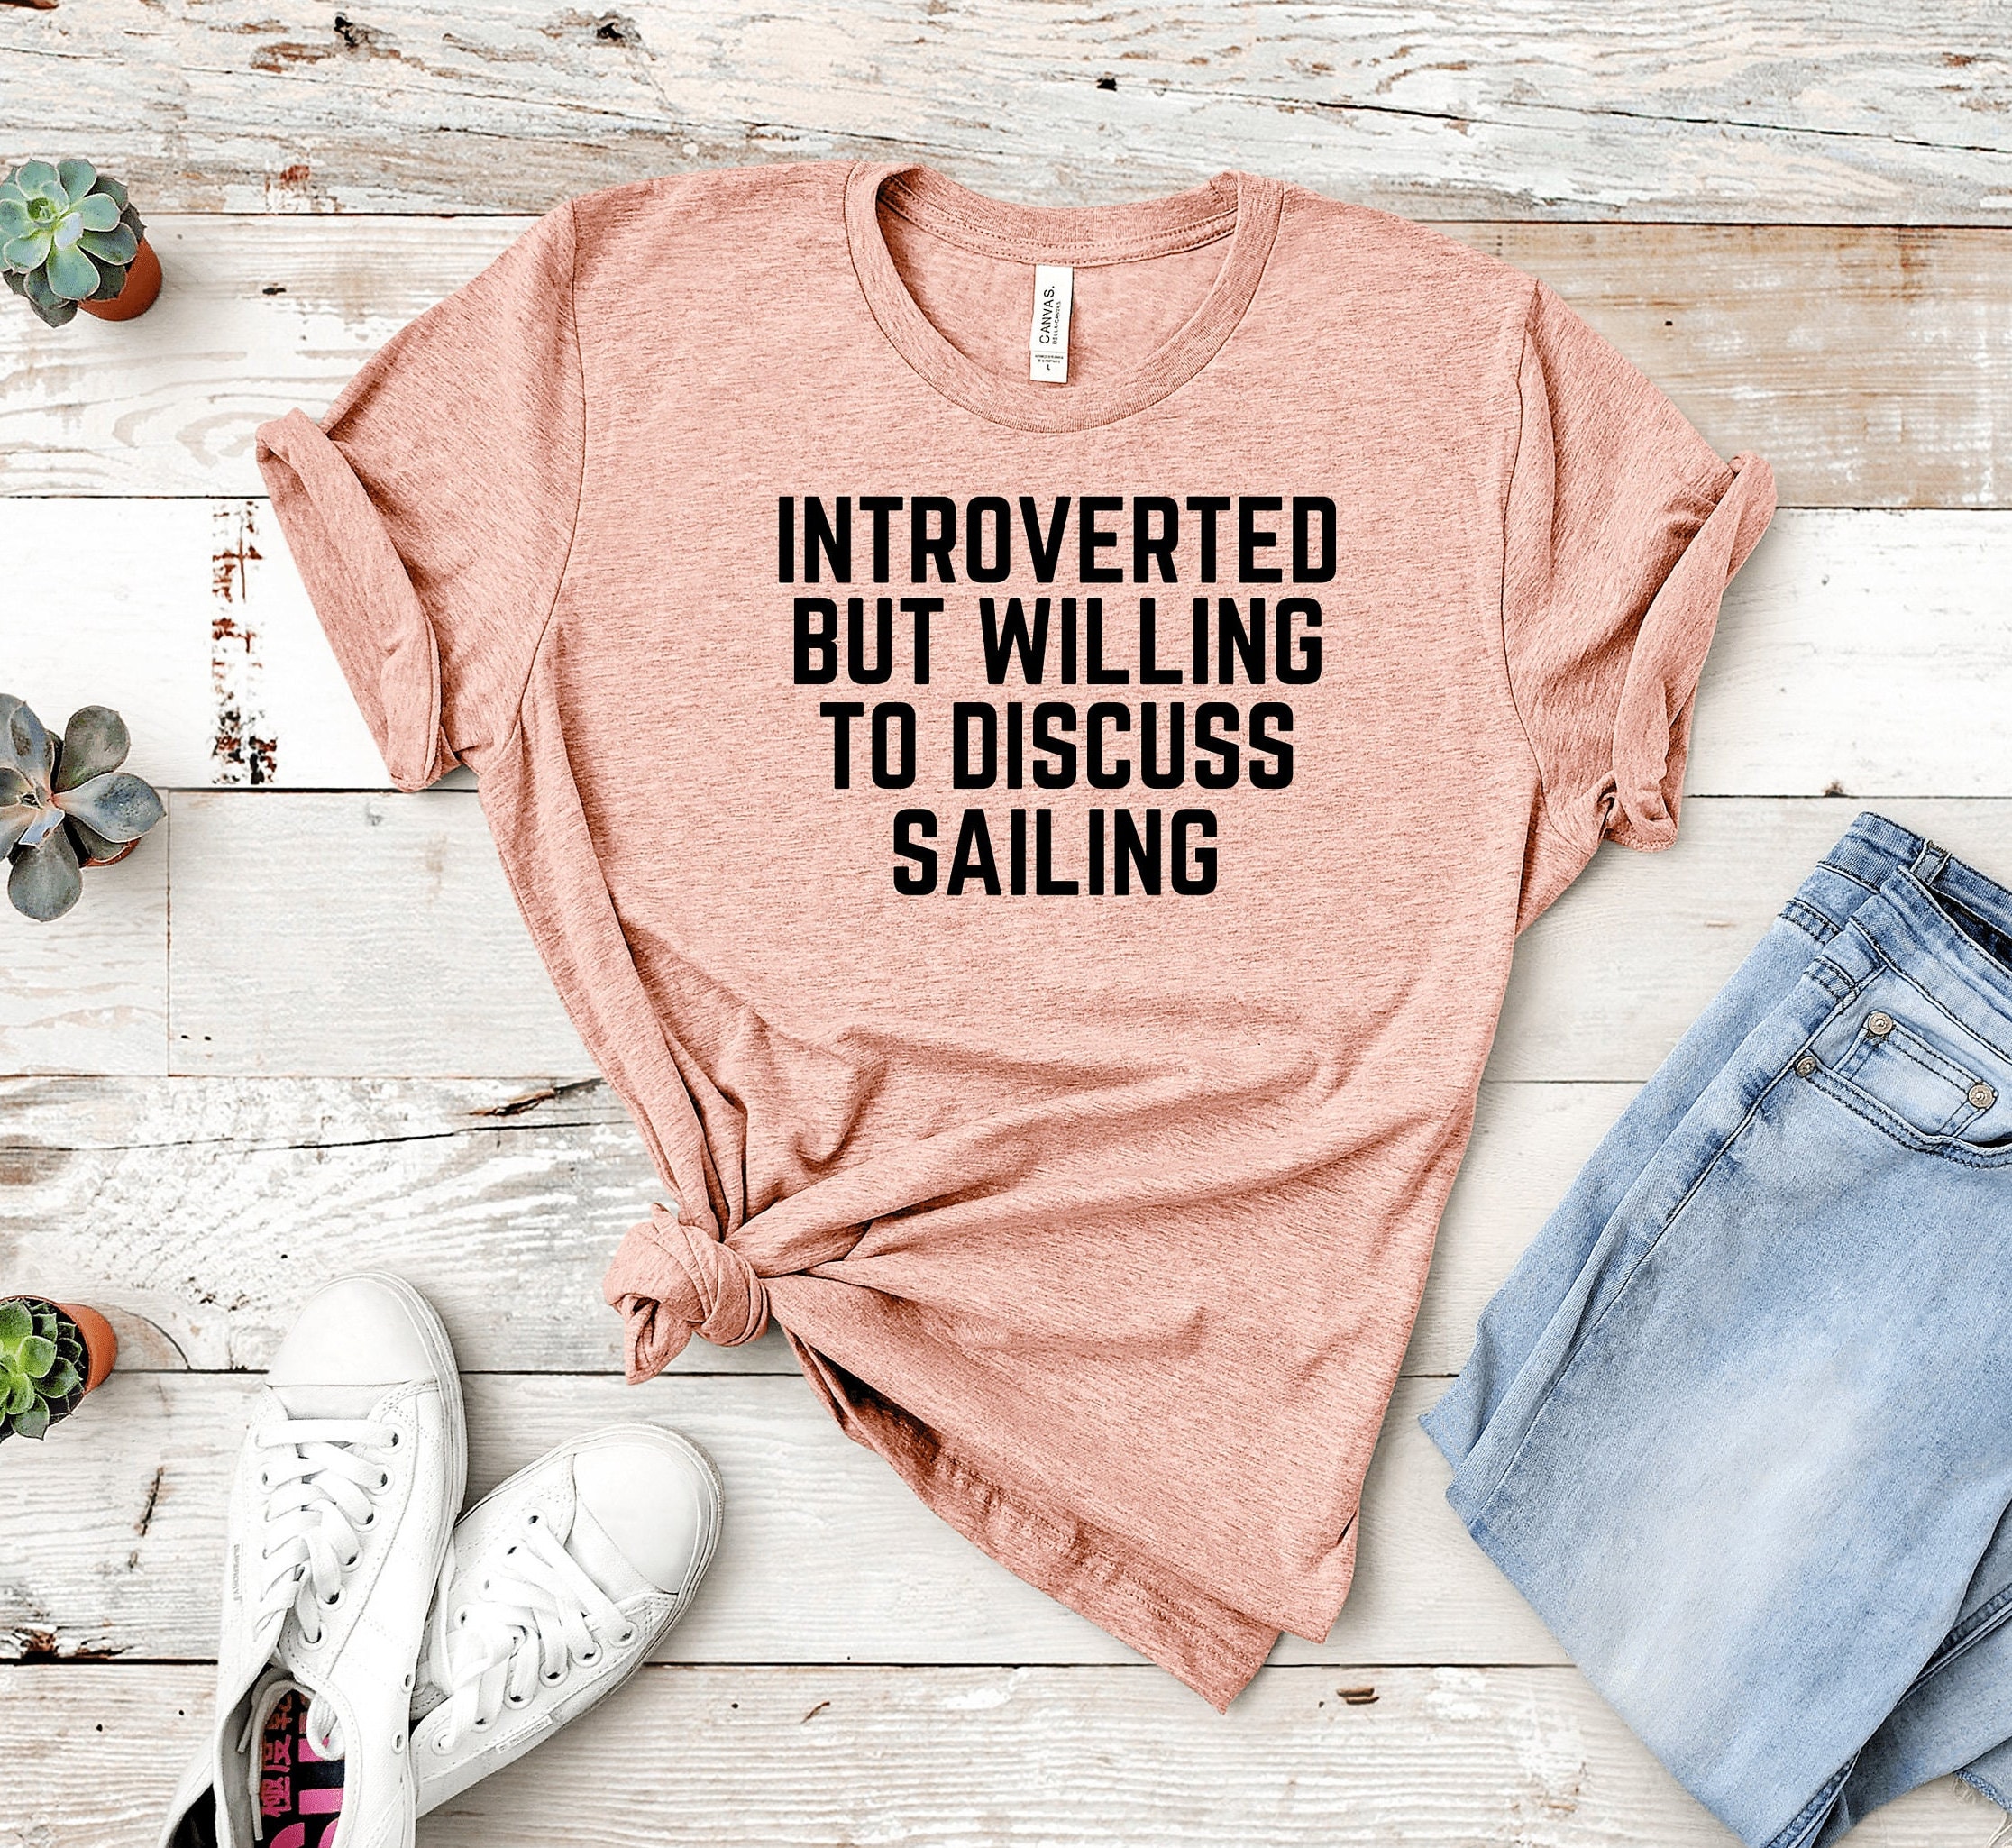 Sailing Shirt, Introverted but Willing to Discuss Sailing, Runner